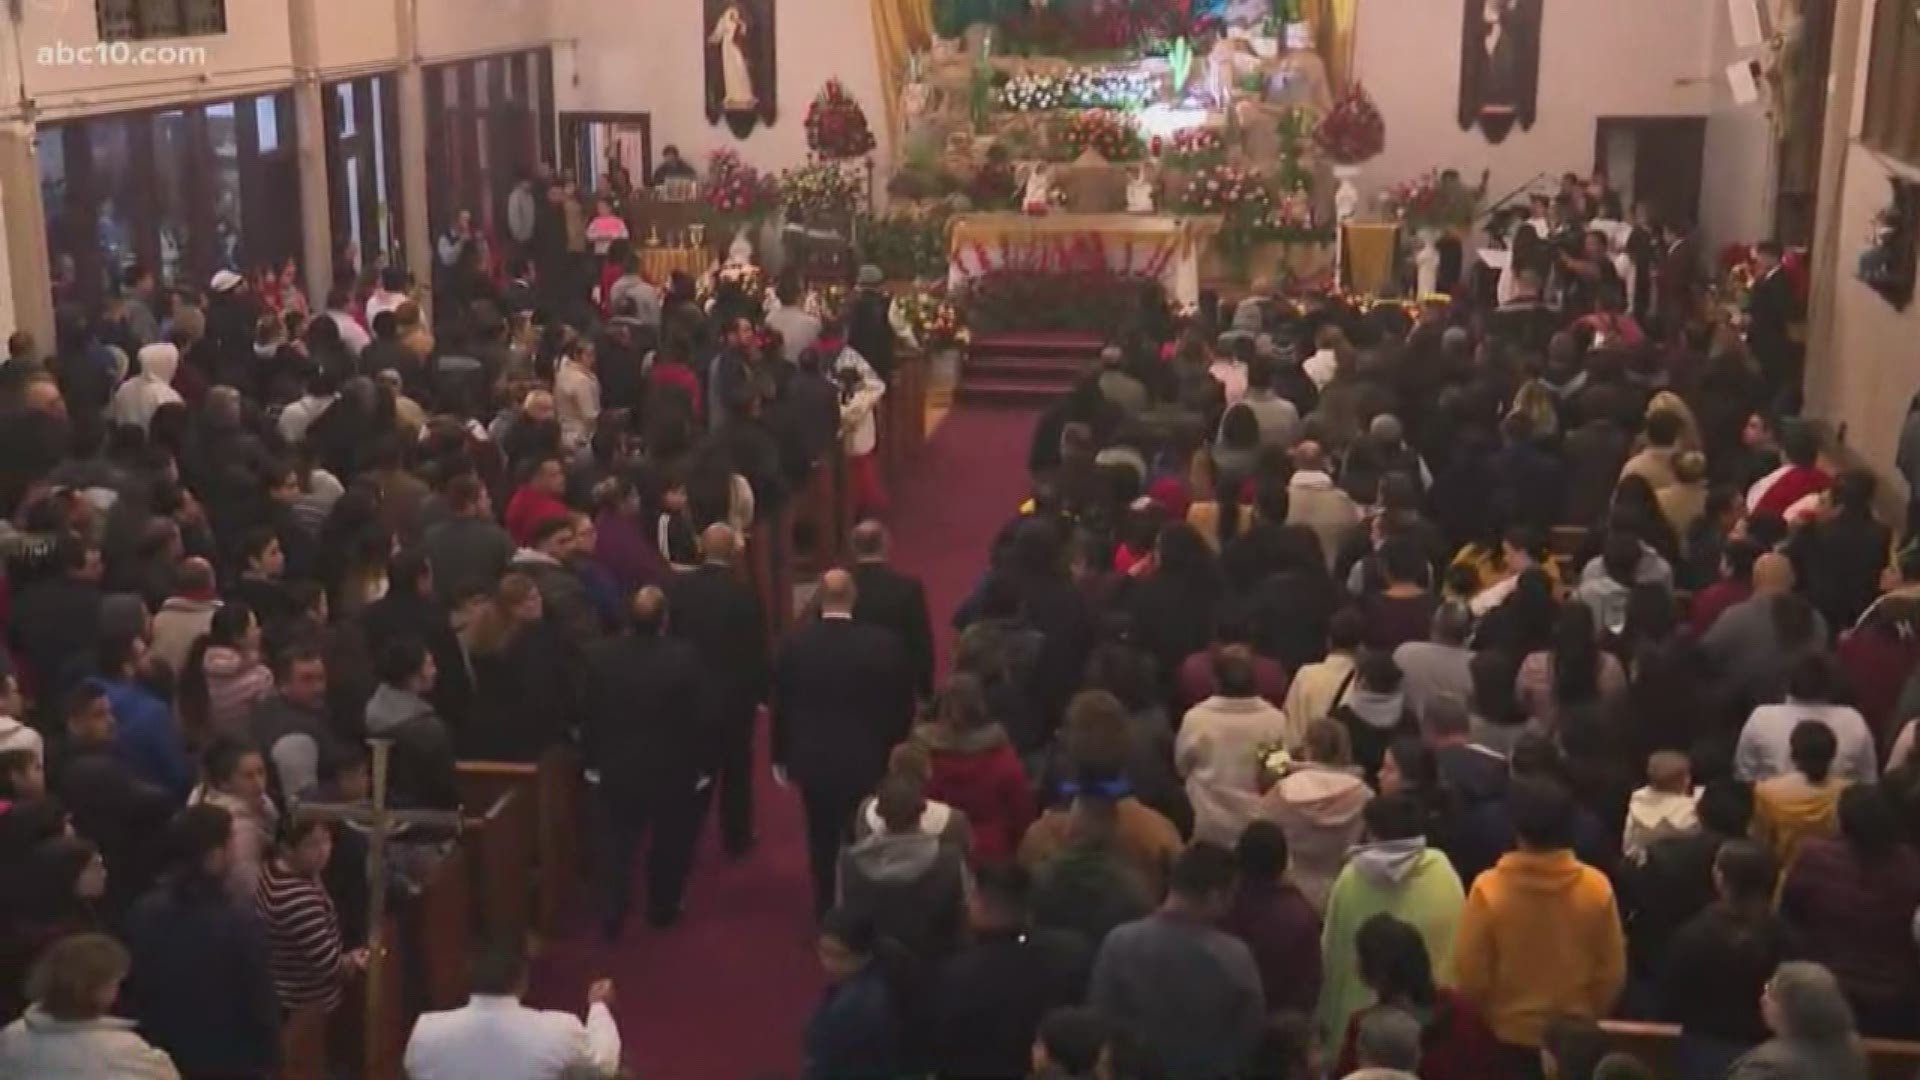 Hundreds of people are gathered in Sacramento for an Our Lady of Guadalupe celebration